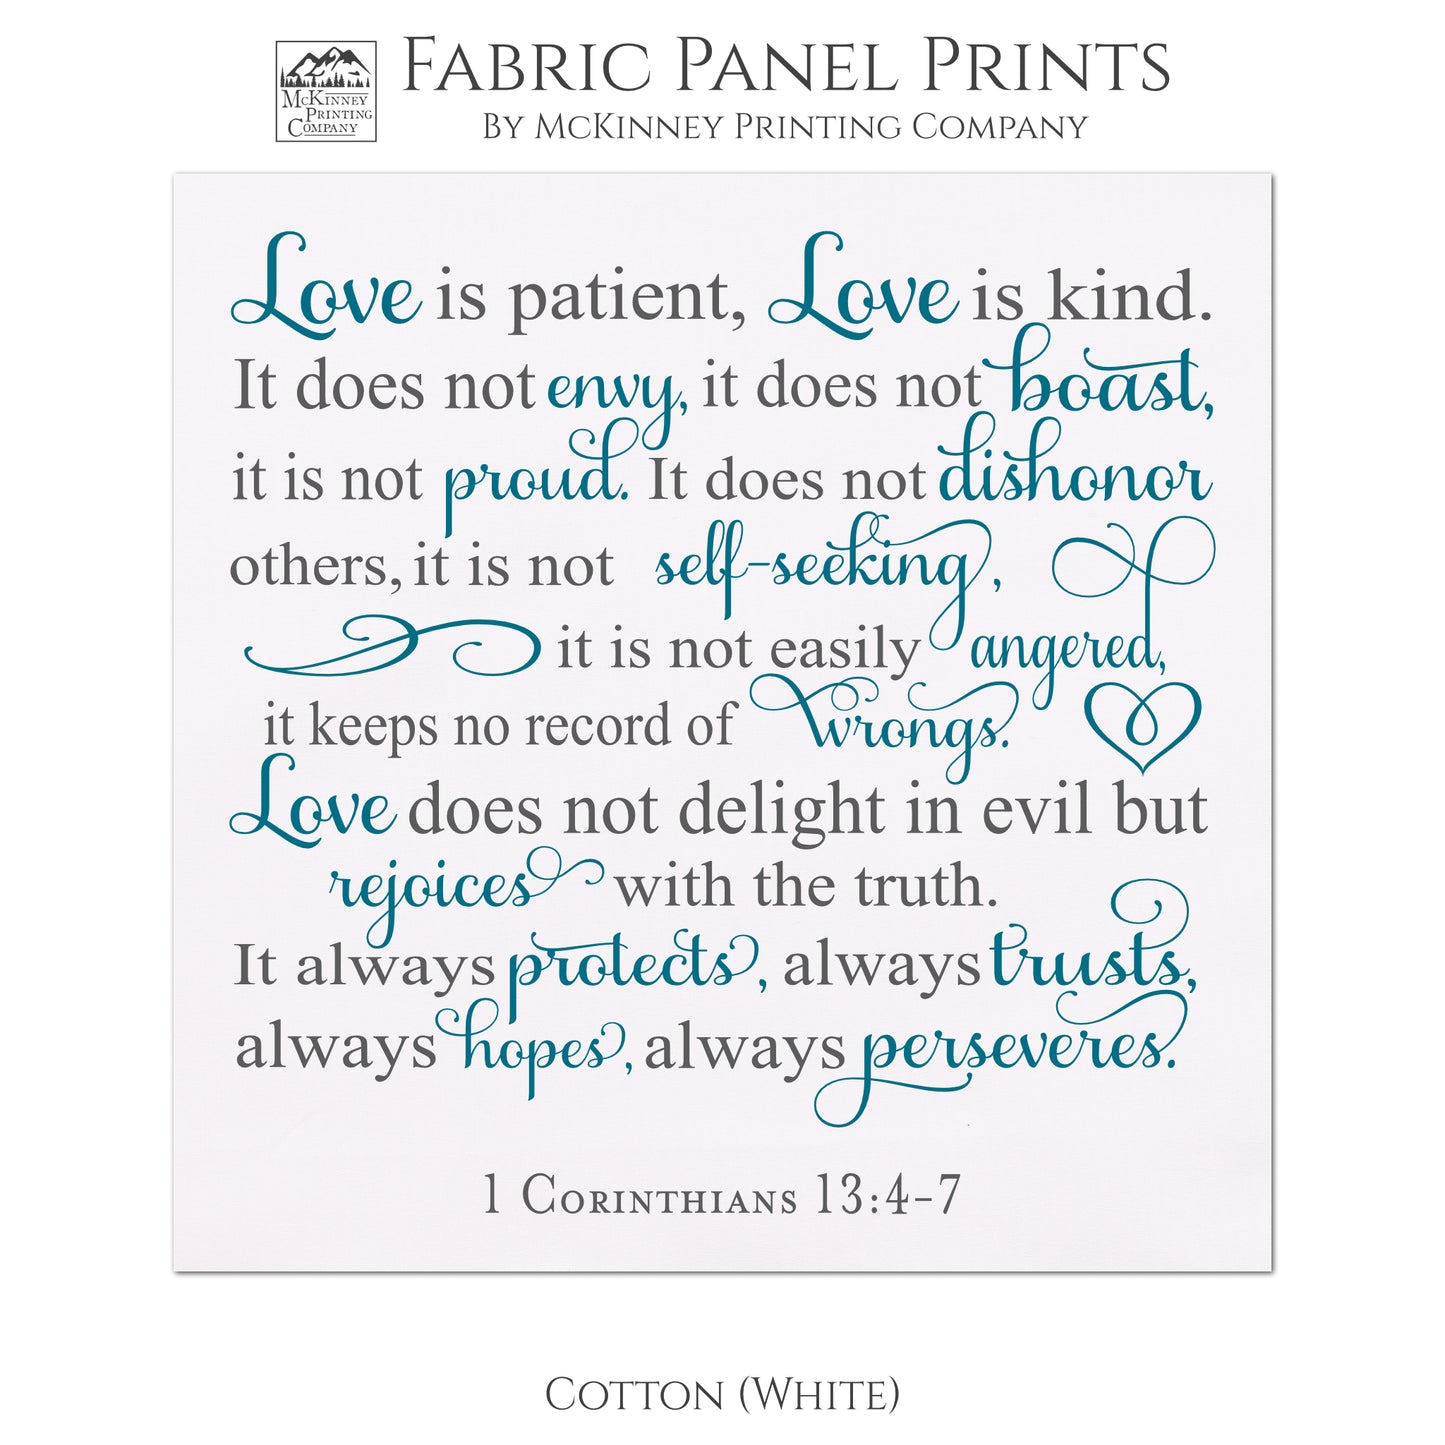 1 Corinthians 13, 4-7, Love is Patient, Love is Kind, Fabric Panel for Quilting, Sewing or Wall Art - Cotton, White